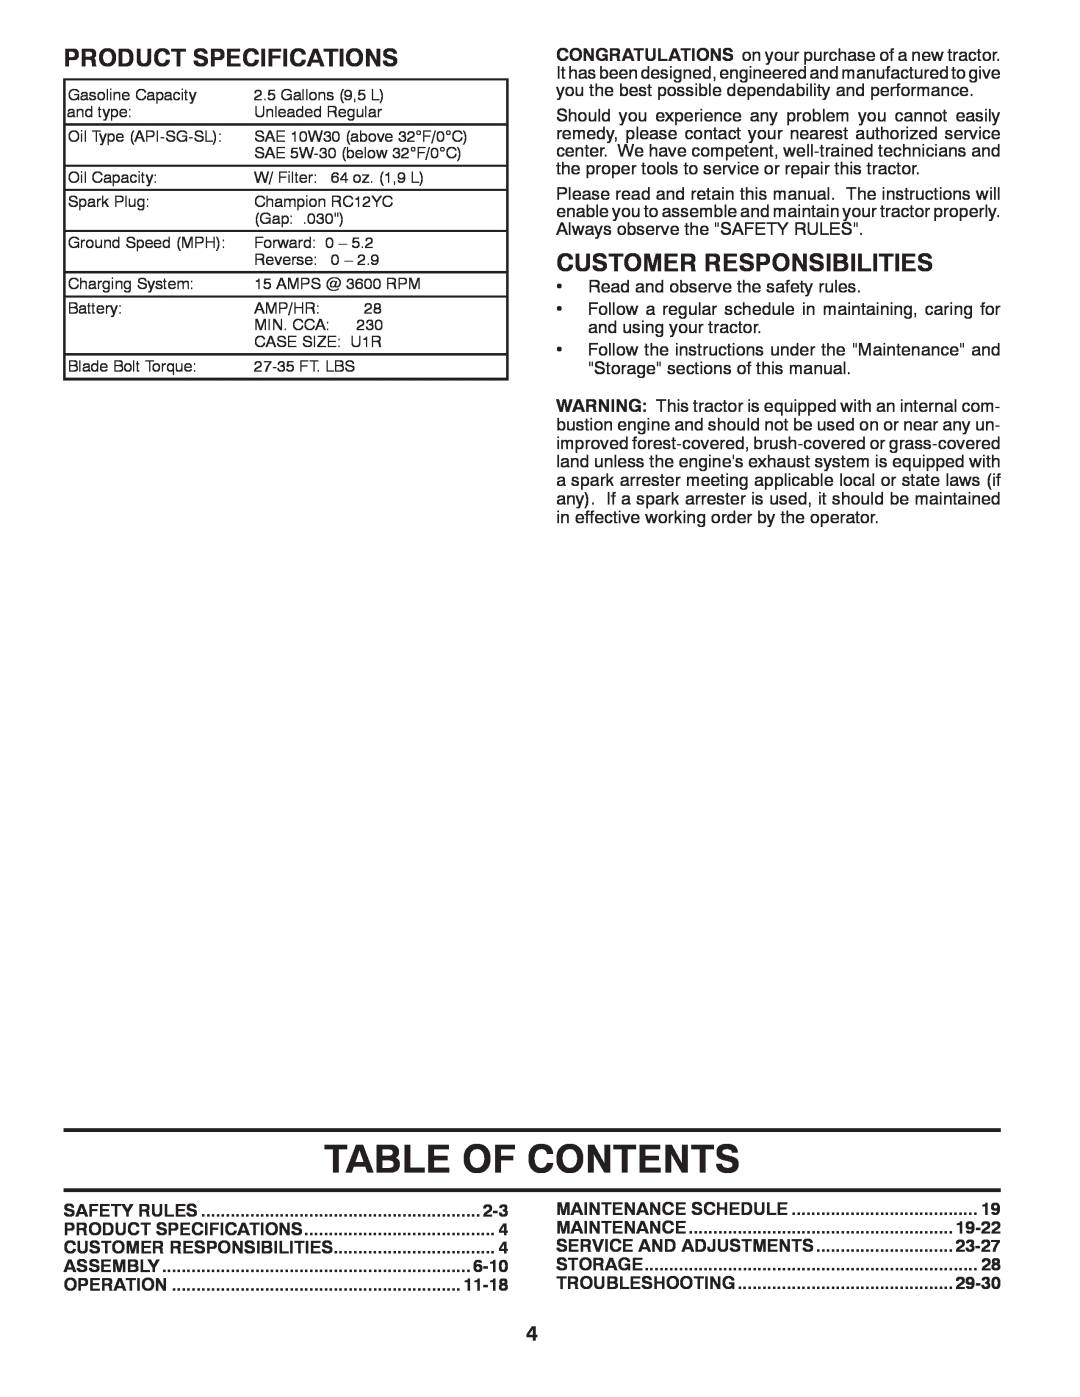 Husqvarna CTH2542T Table Of Contents, Product Specifications, Customer Responsibilities, 6-10, 11-18, 19-22, 23-27, 29-30 